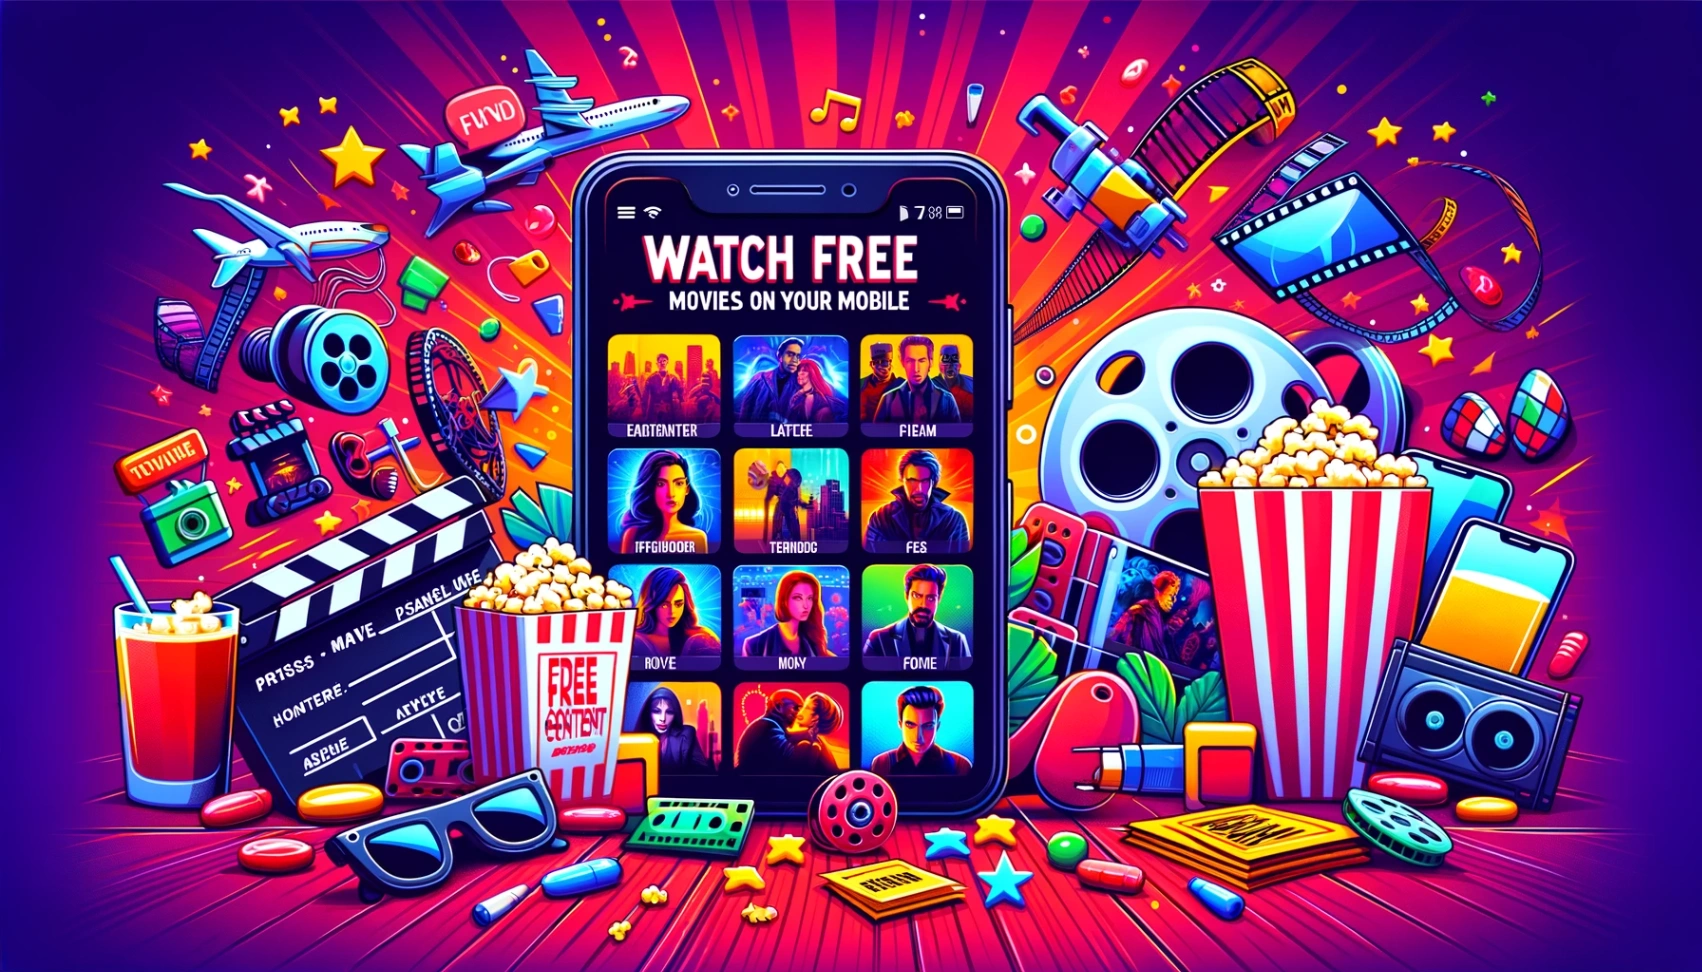 Learn How to Watch Free Movies on Your Mobile